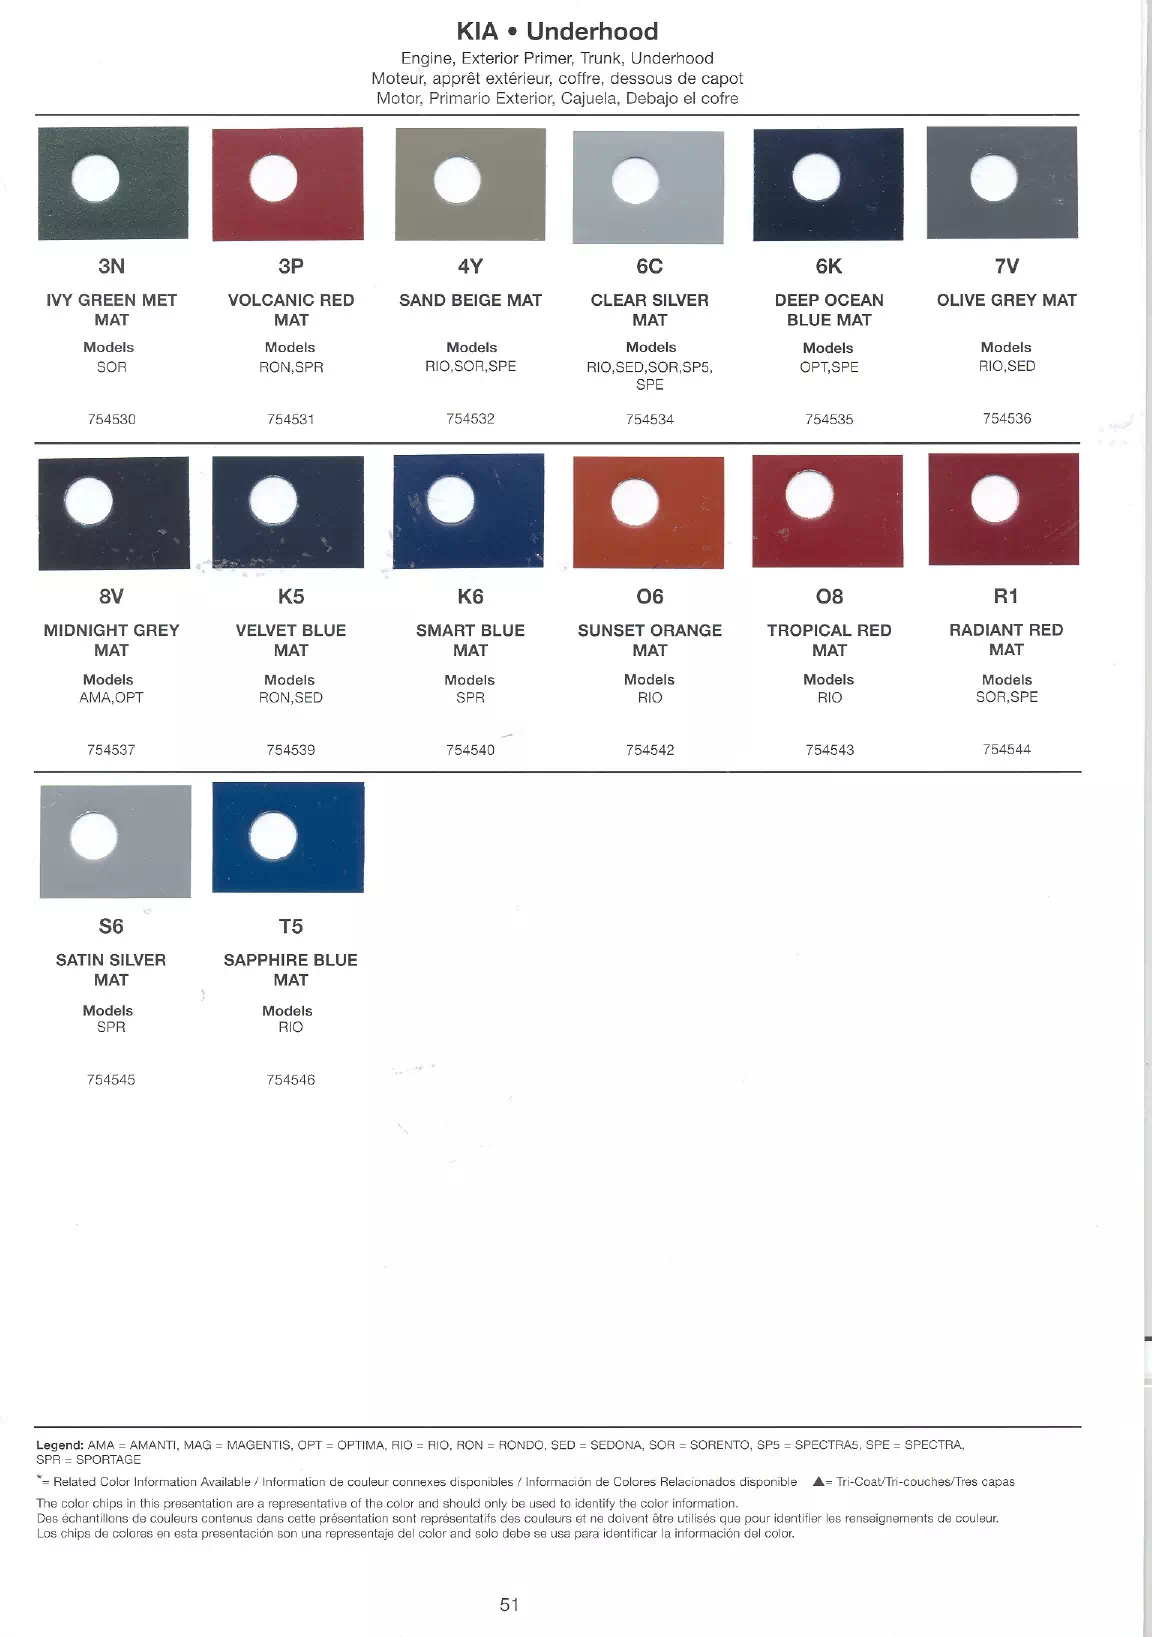 paint swatches with paint codes in text for 2007 kias